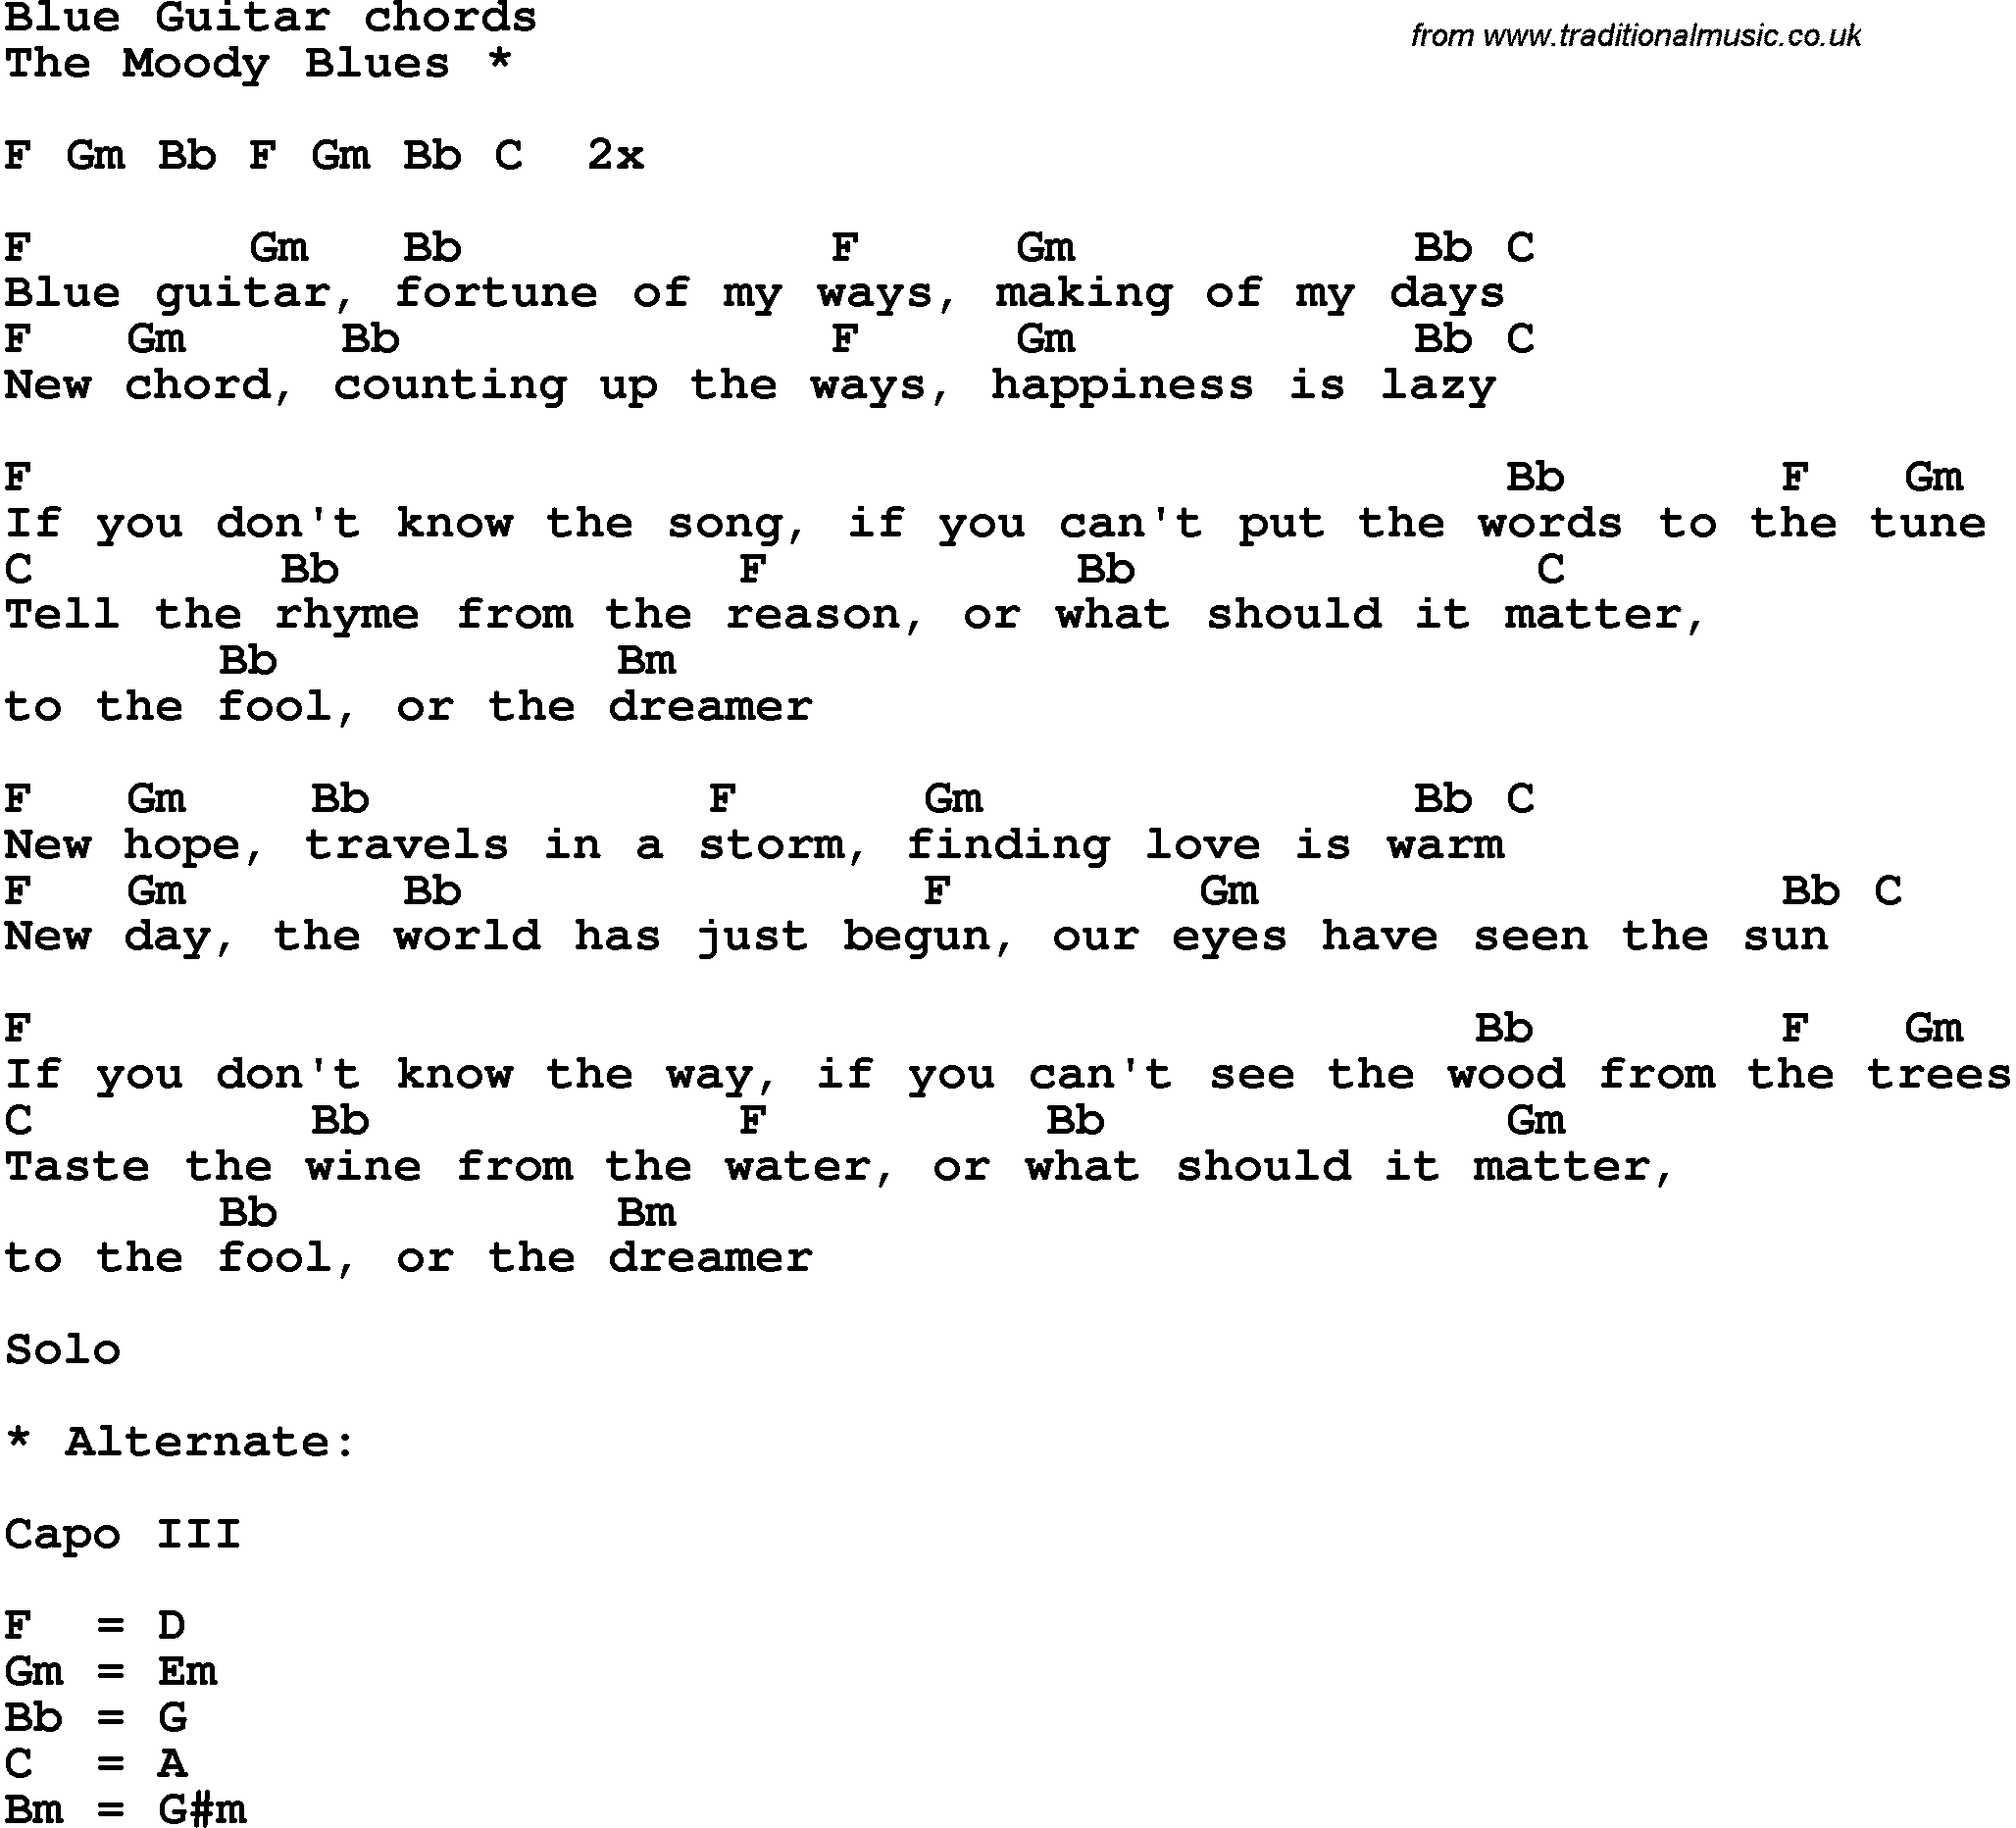 Song Lyrics with guitar chords for Blue Guitar